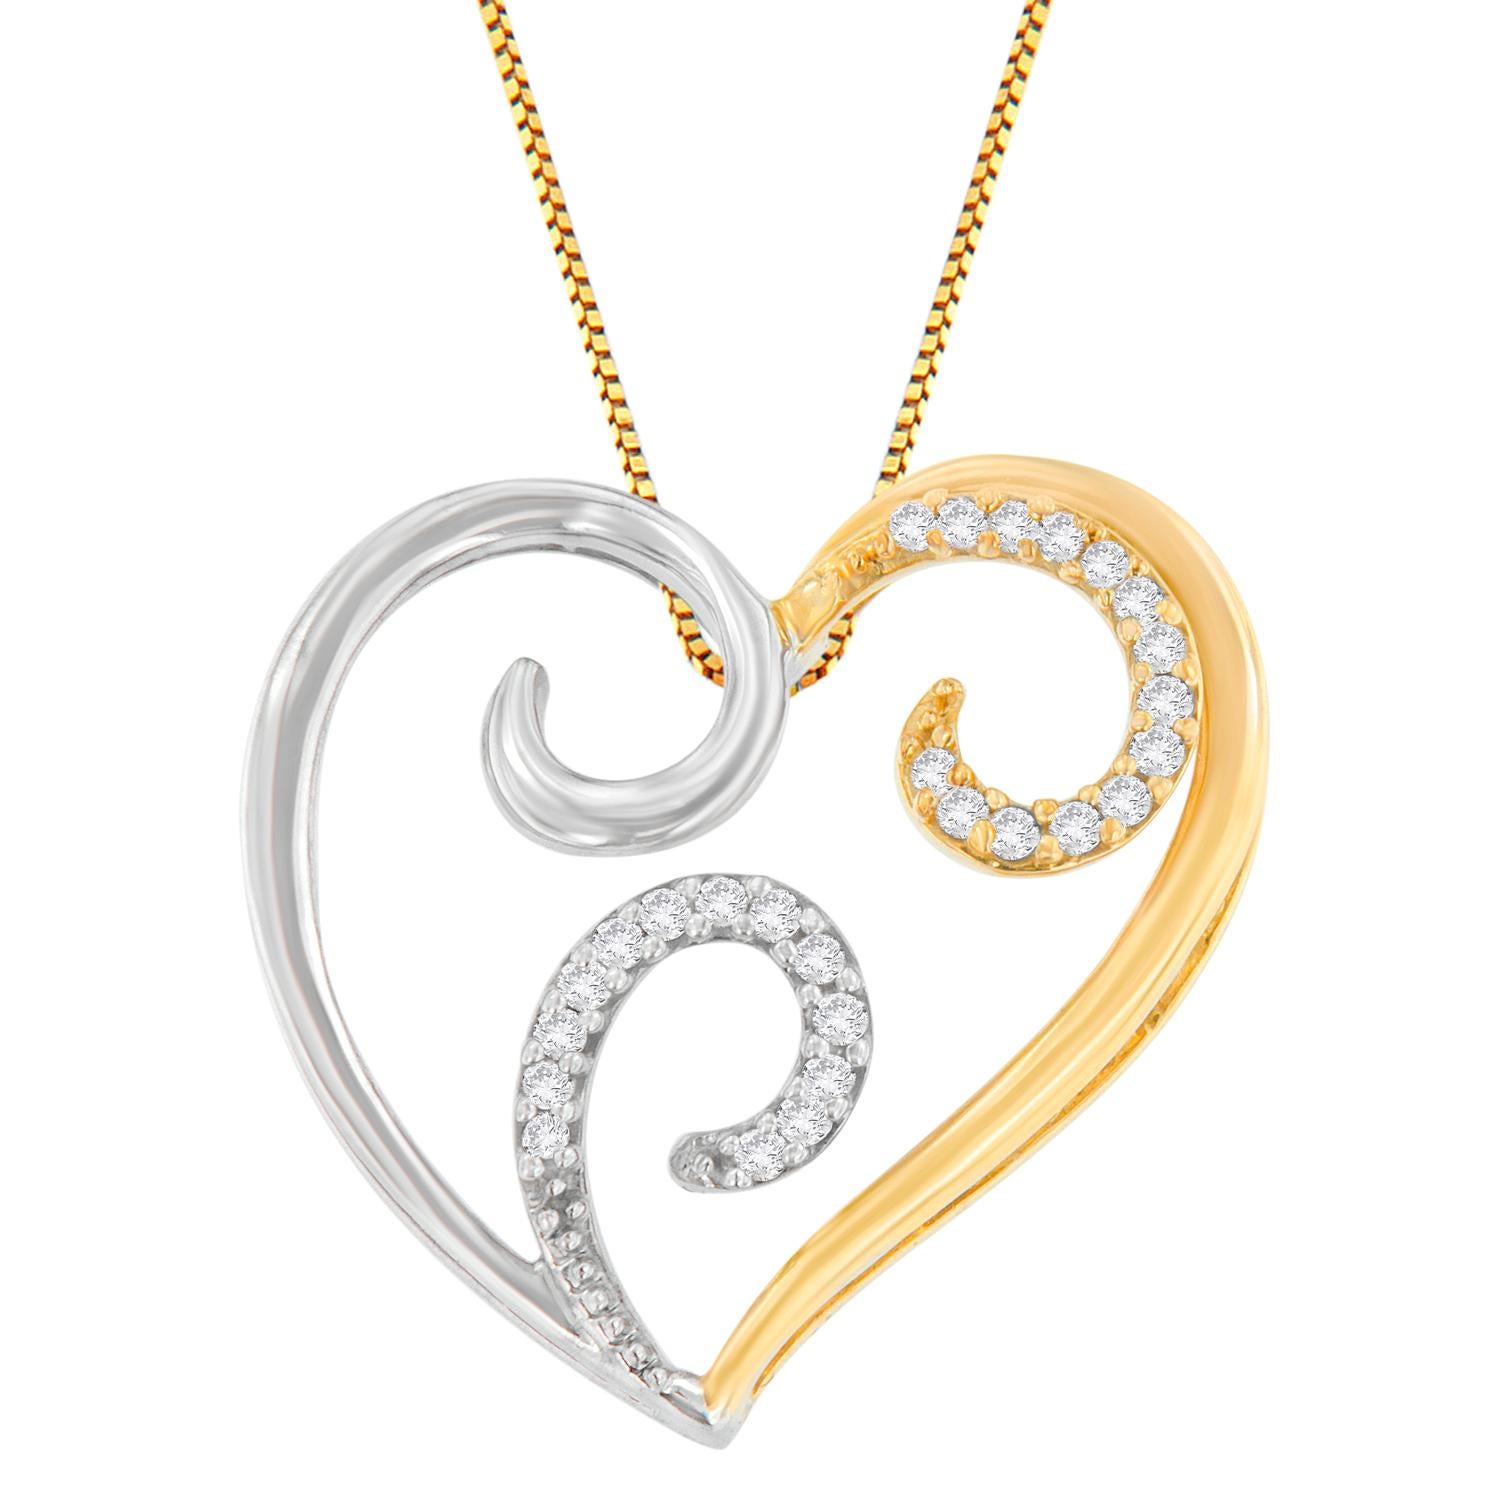 Bold and brilliant, this heart-shaped pendant with swirl accents in the center is made using two-toned gold. The one-half of the pendant is composed of 10 karats white gold and the other half with yellow gold. Further, the swirls in the middle are